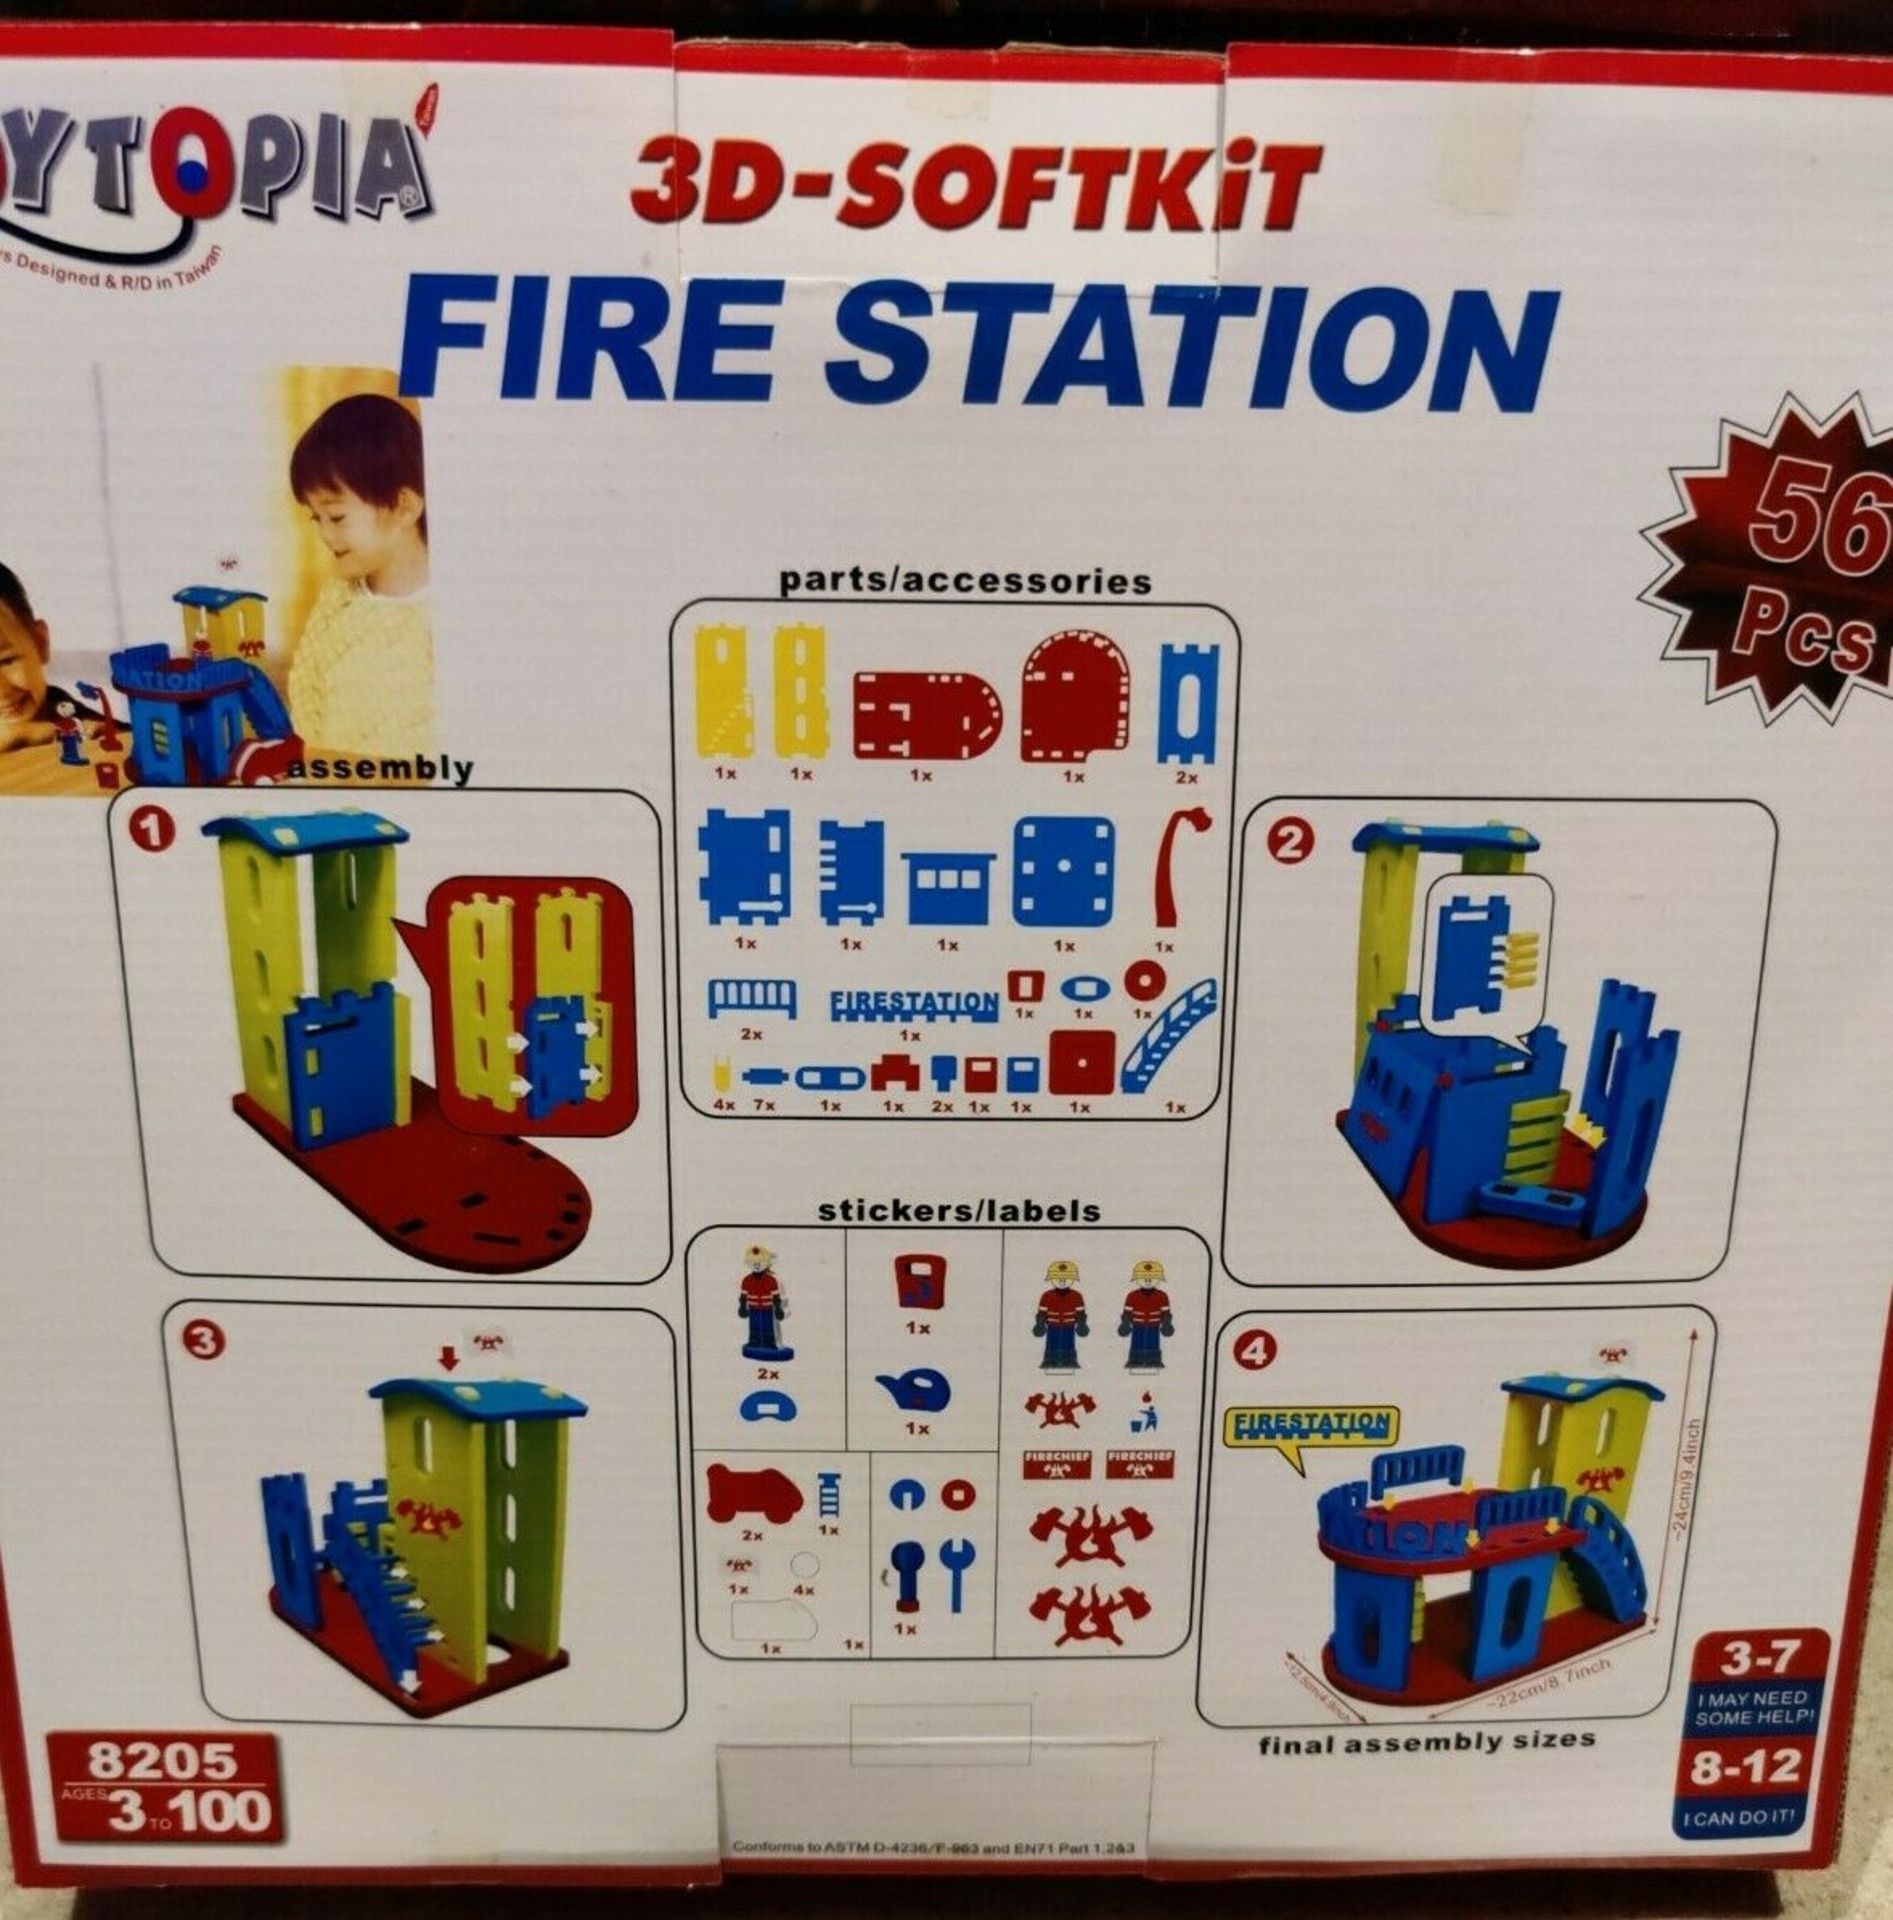 Toytopia 3D Softkit Fire Station - 56 Piece Play Set - Image 3 of 4